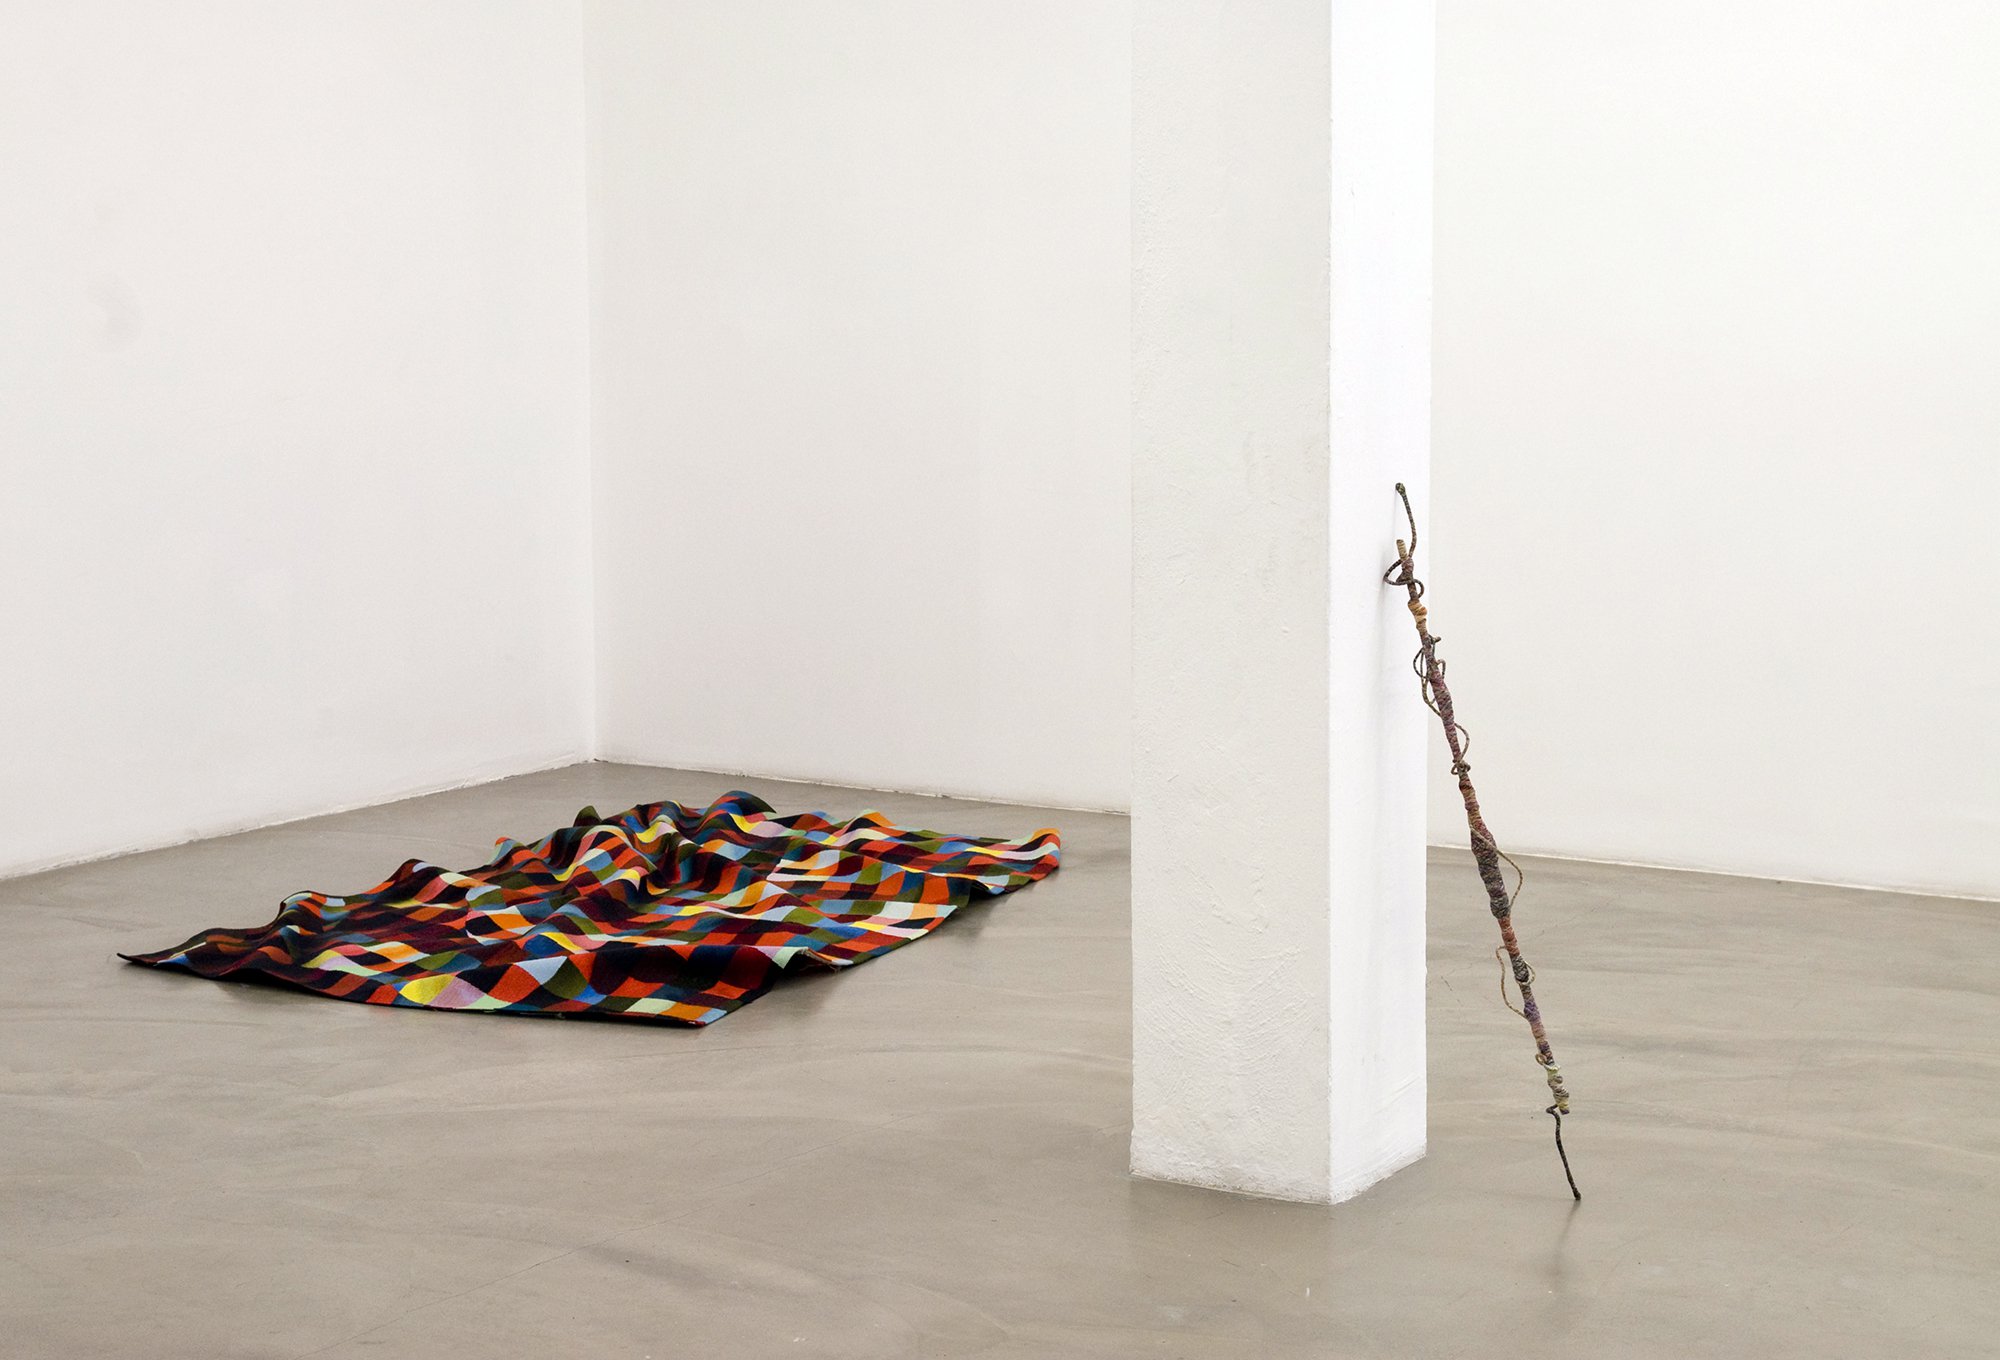 (Left) Rupert Norfolk, Pixelweave, Aubusson tapestry, 2005. (Right) Jim Lambie, Psychedelic Soul Stick 73, bamboo, wire, coloured thread, necklace, Ace of Spades playing card, green feather, Marlboro light packet, 105 x 8 x 8 cm (41 3/8 x 3 1/8 x 3 1/8 in), 2009. Installation view, Altogether Elsewhere, Rodeo, Istanbul, 2010